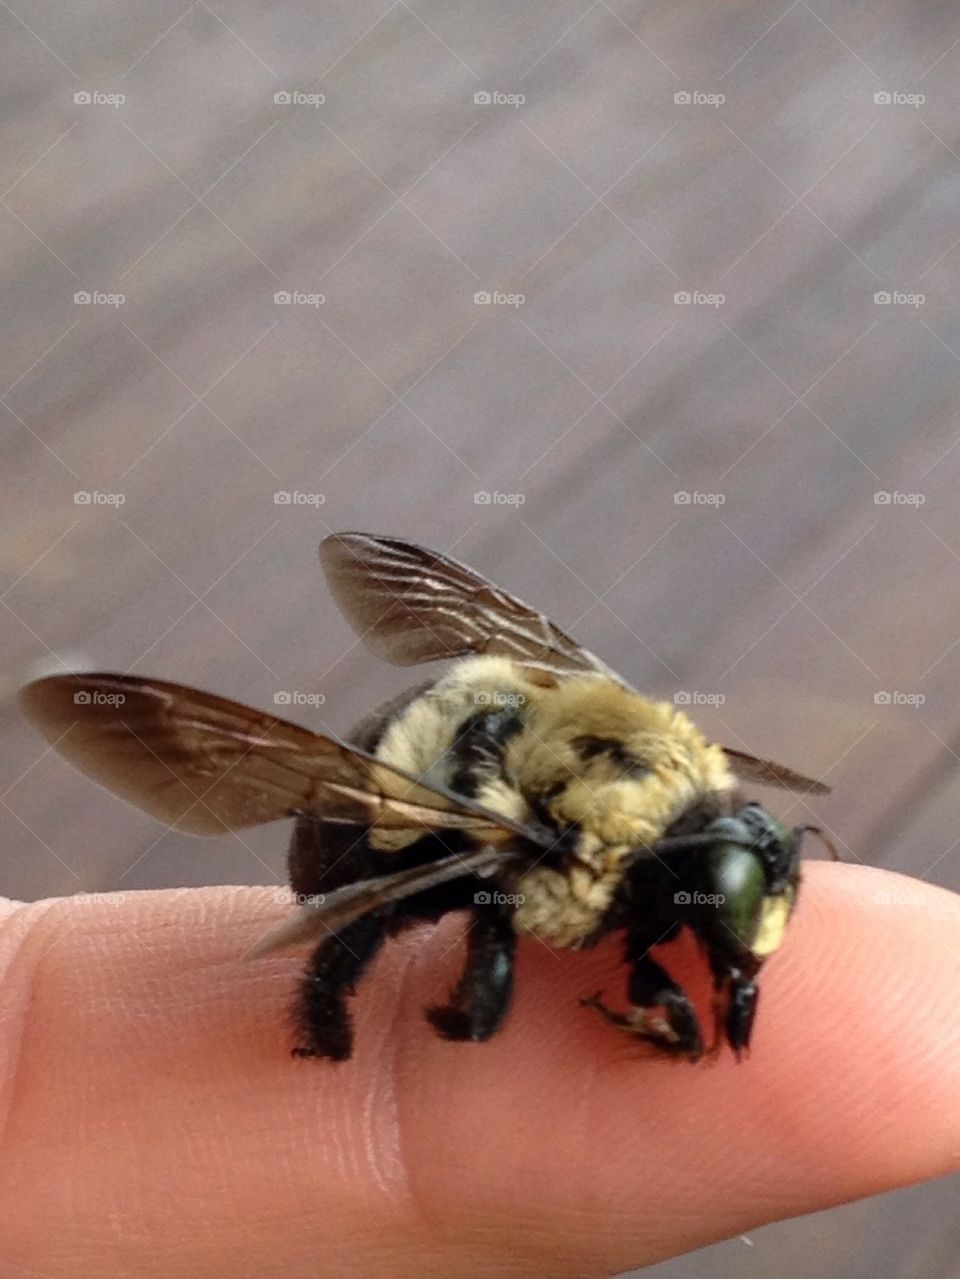 Holding a bee